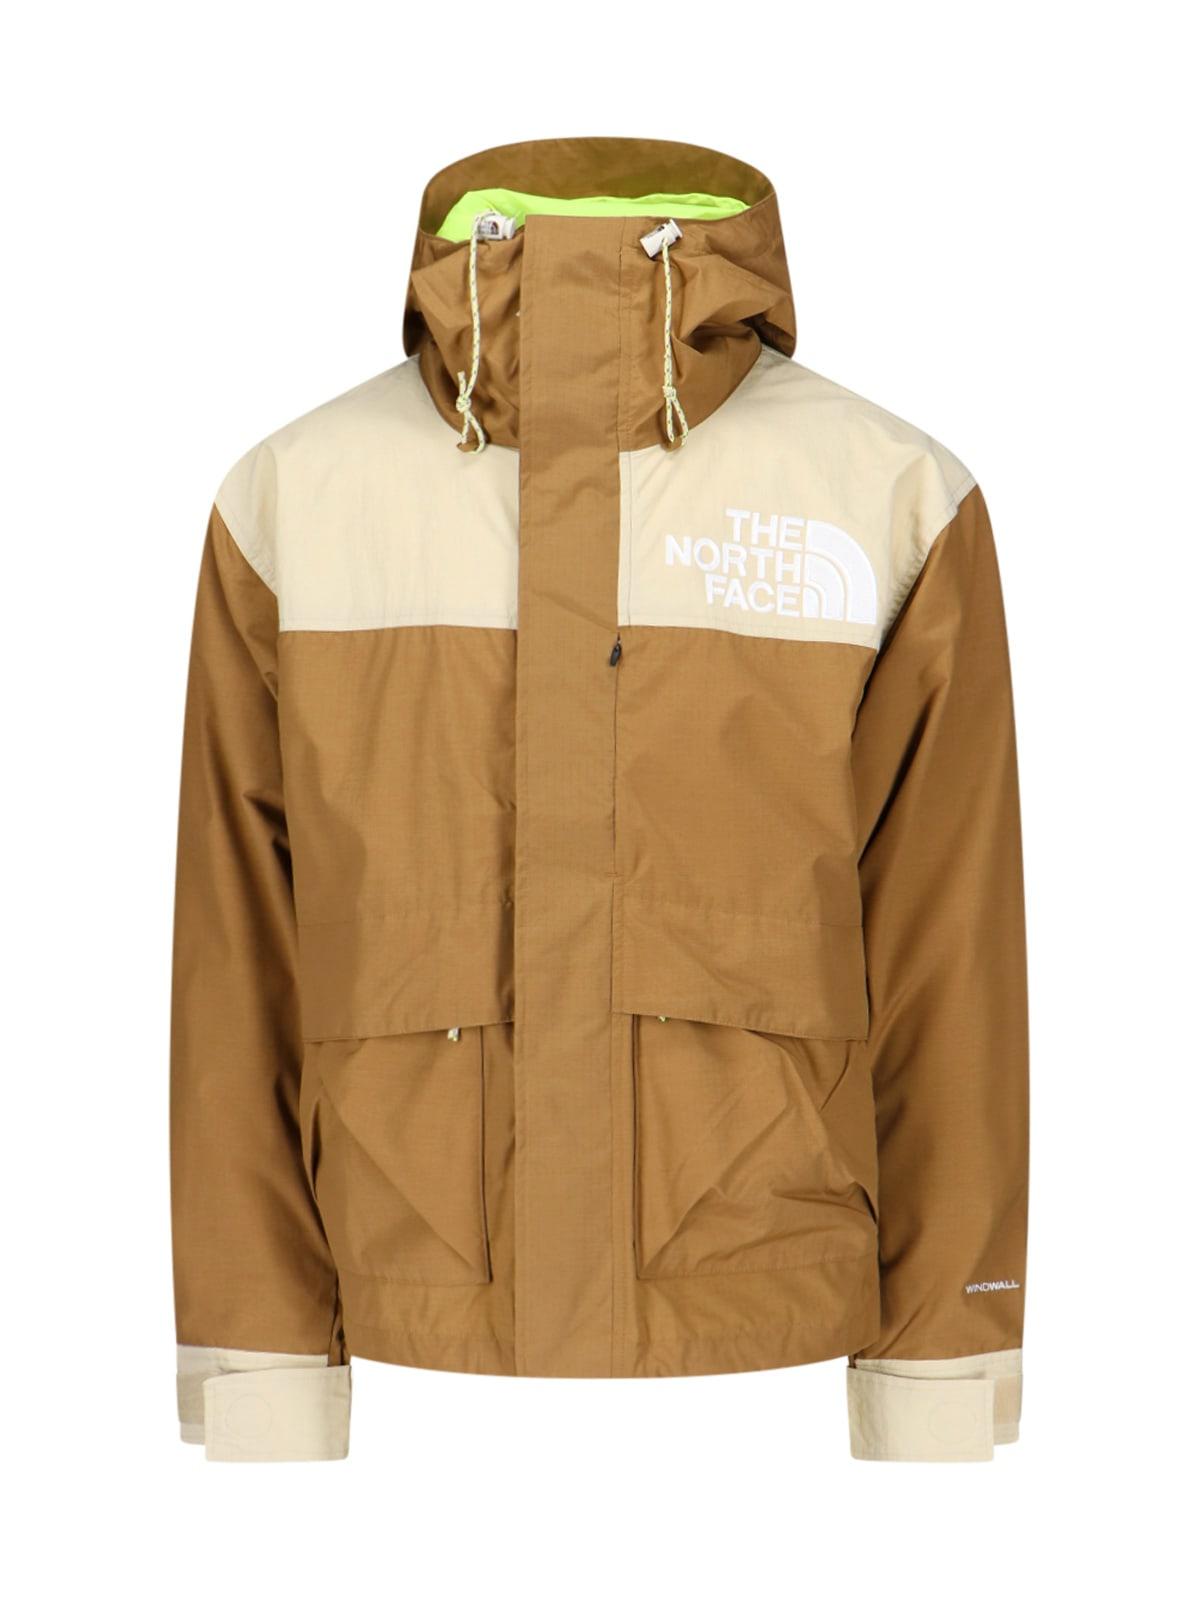 The North Face Jacket in Metallic for Men | Lyst